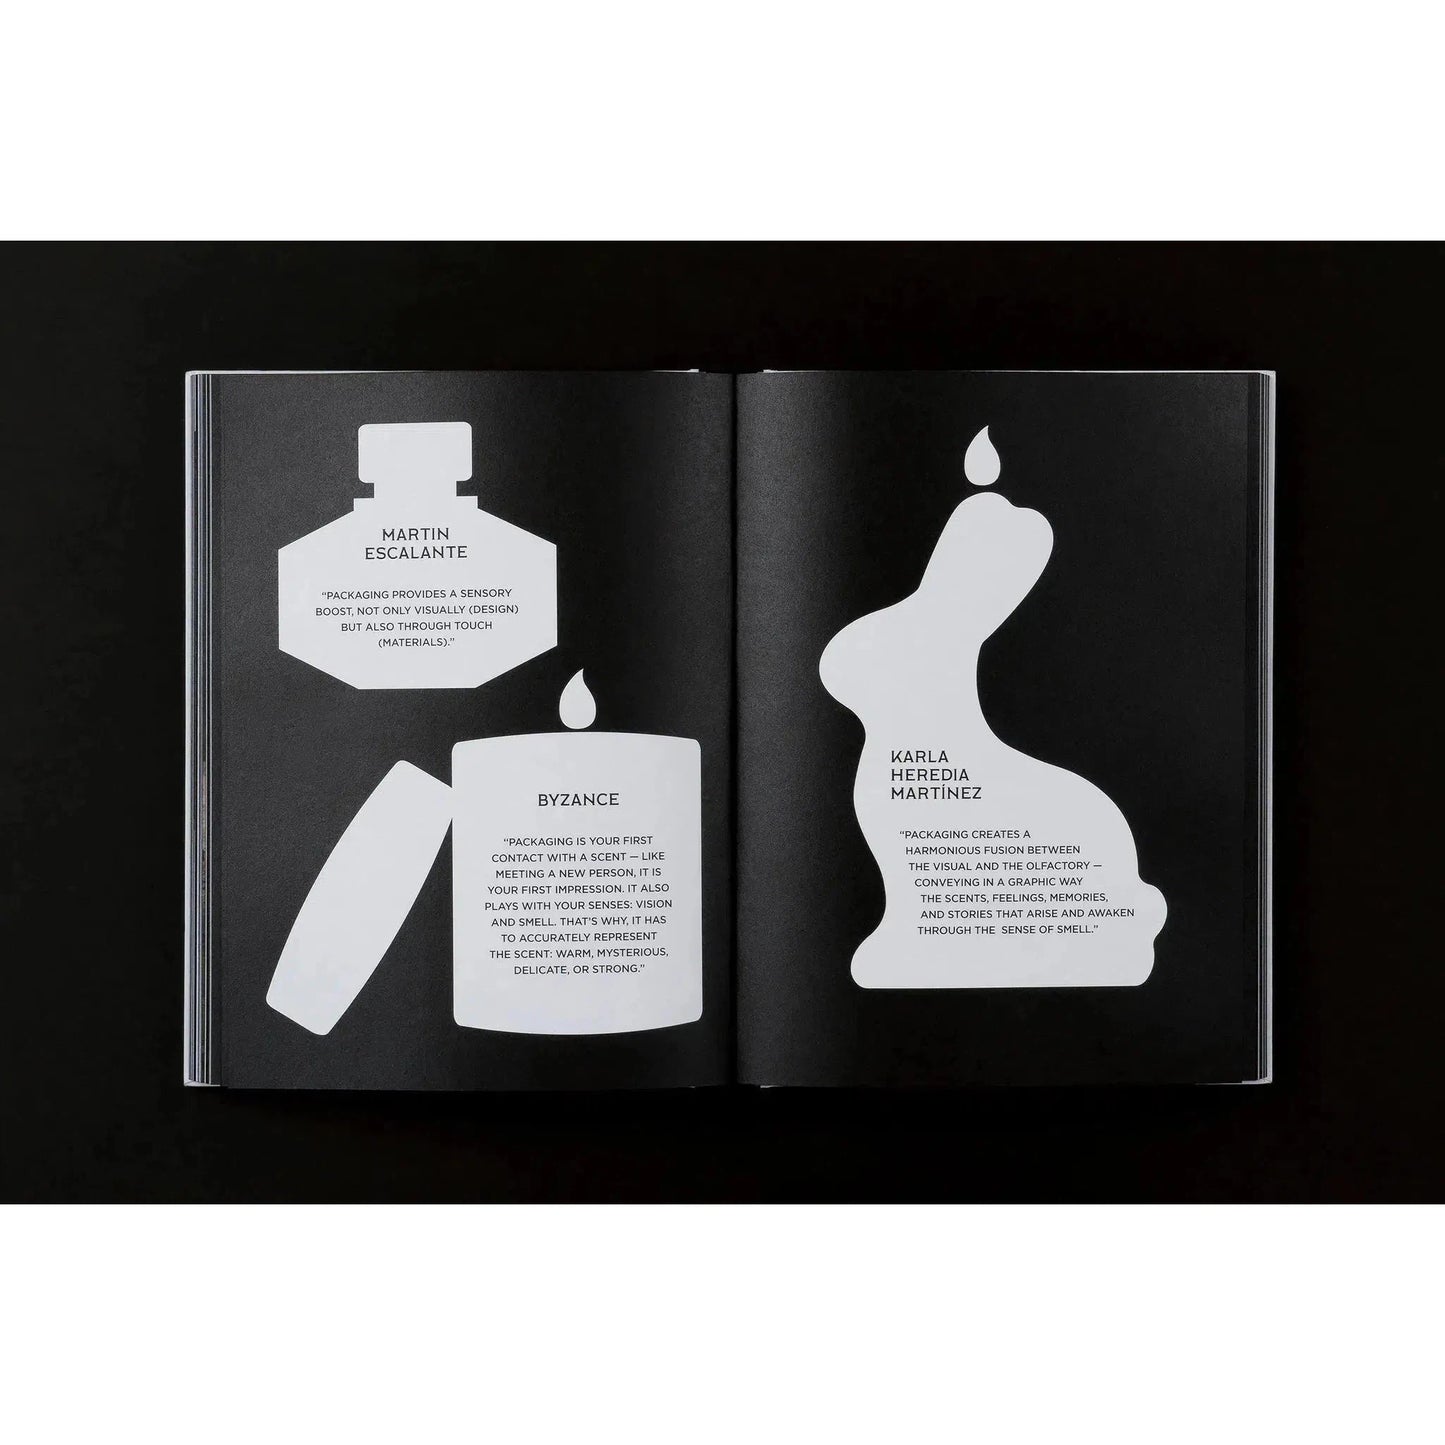 Packaged for Life: Scent: Packaging design for everyday objects